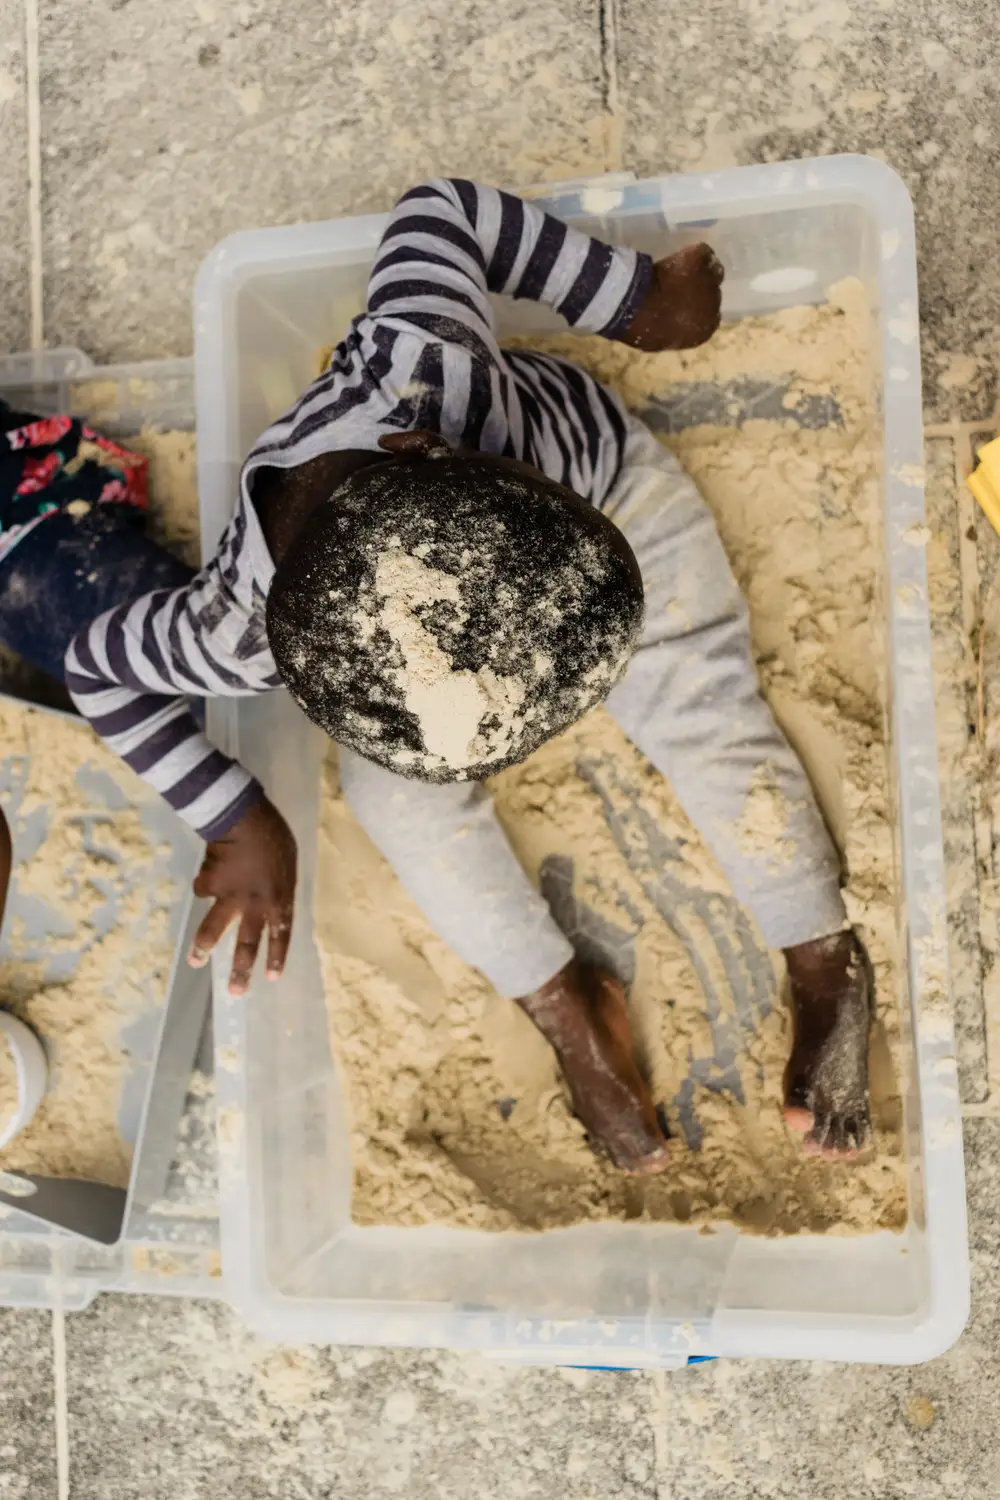 Child playing in a sand box